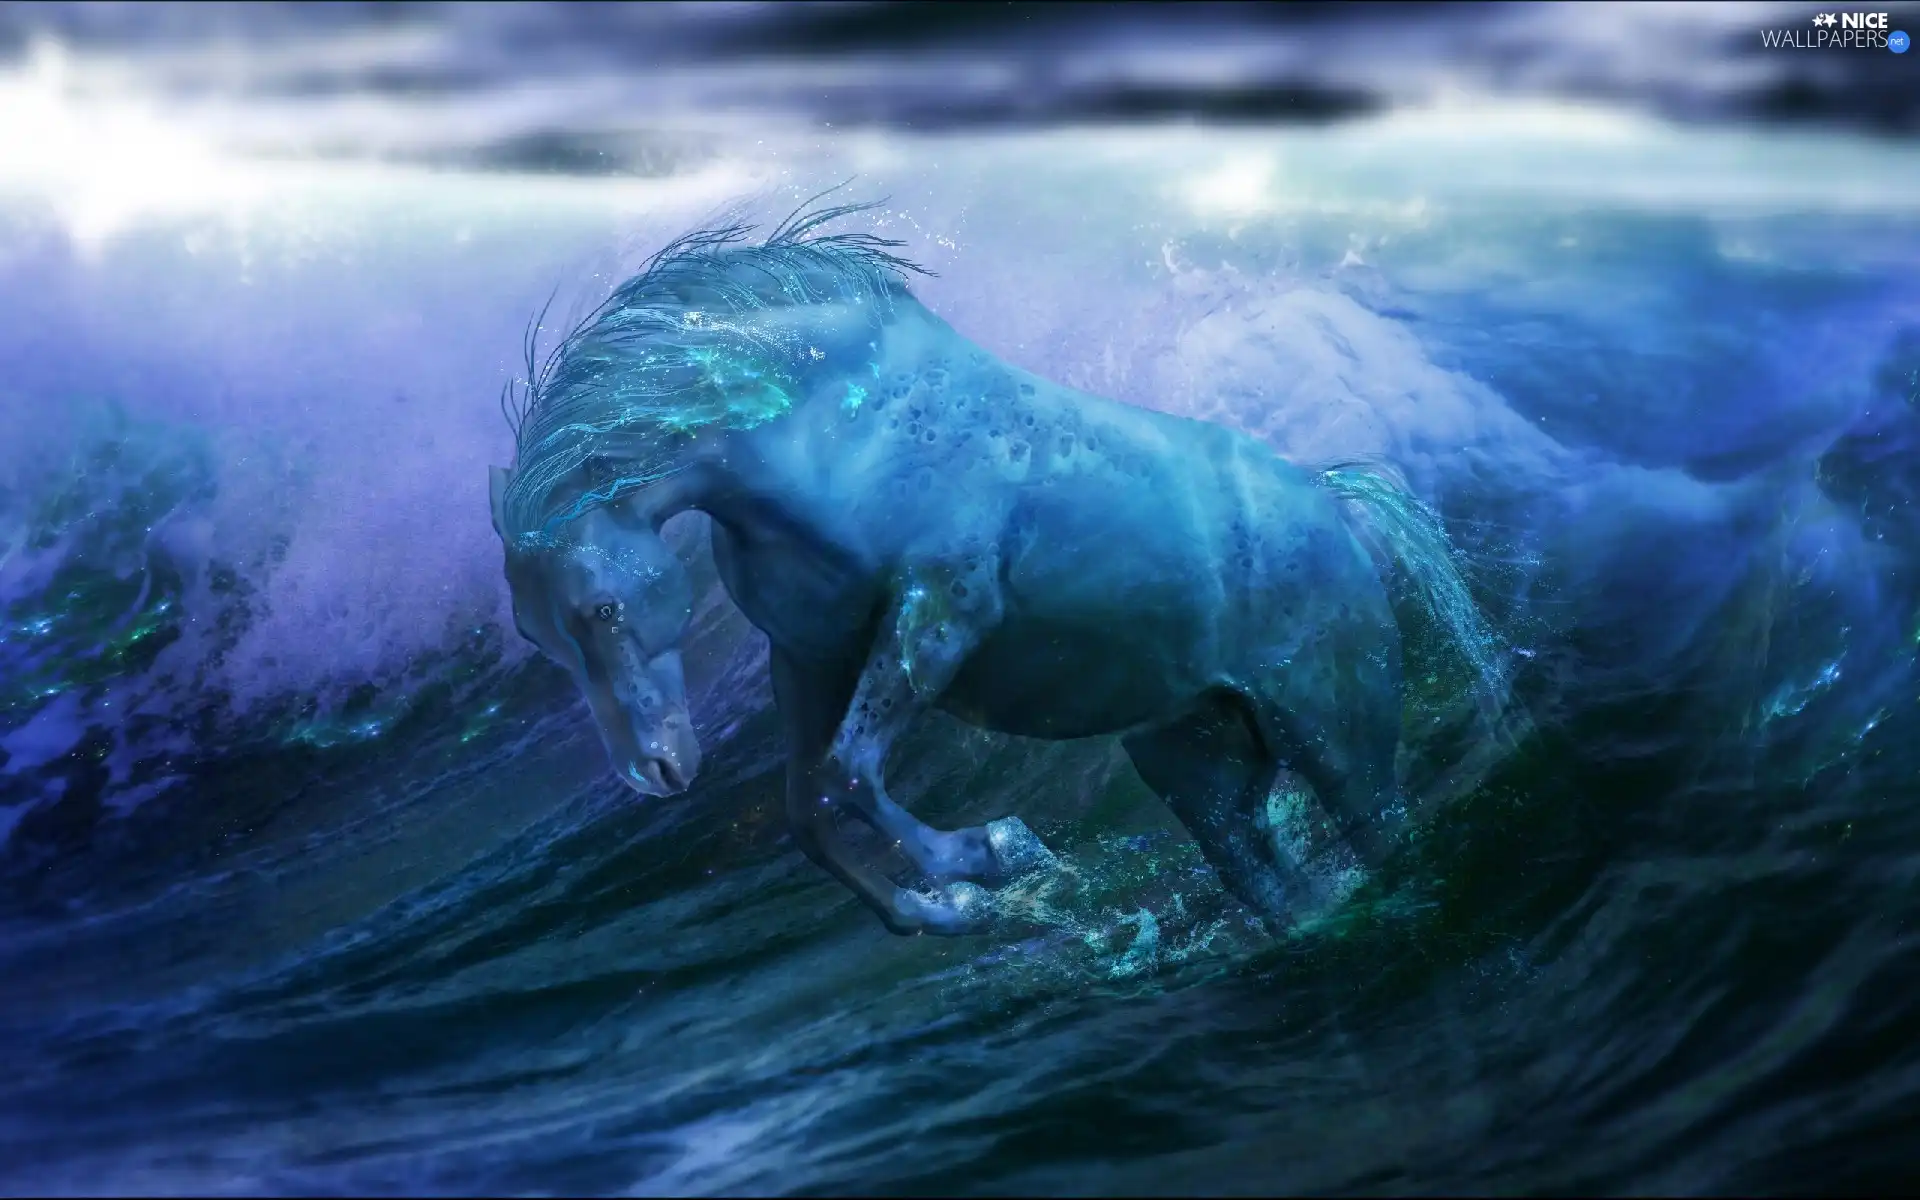 Horse, Waves